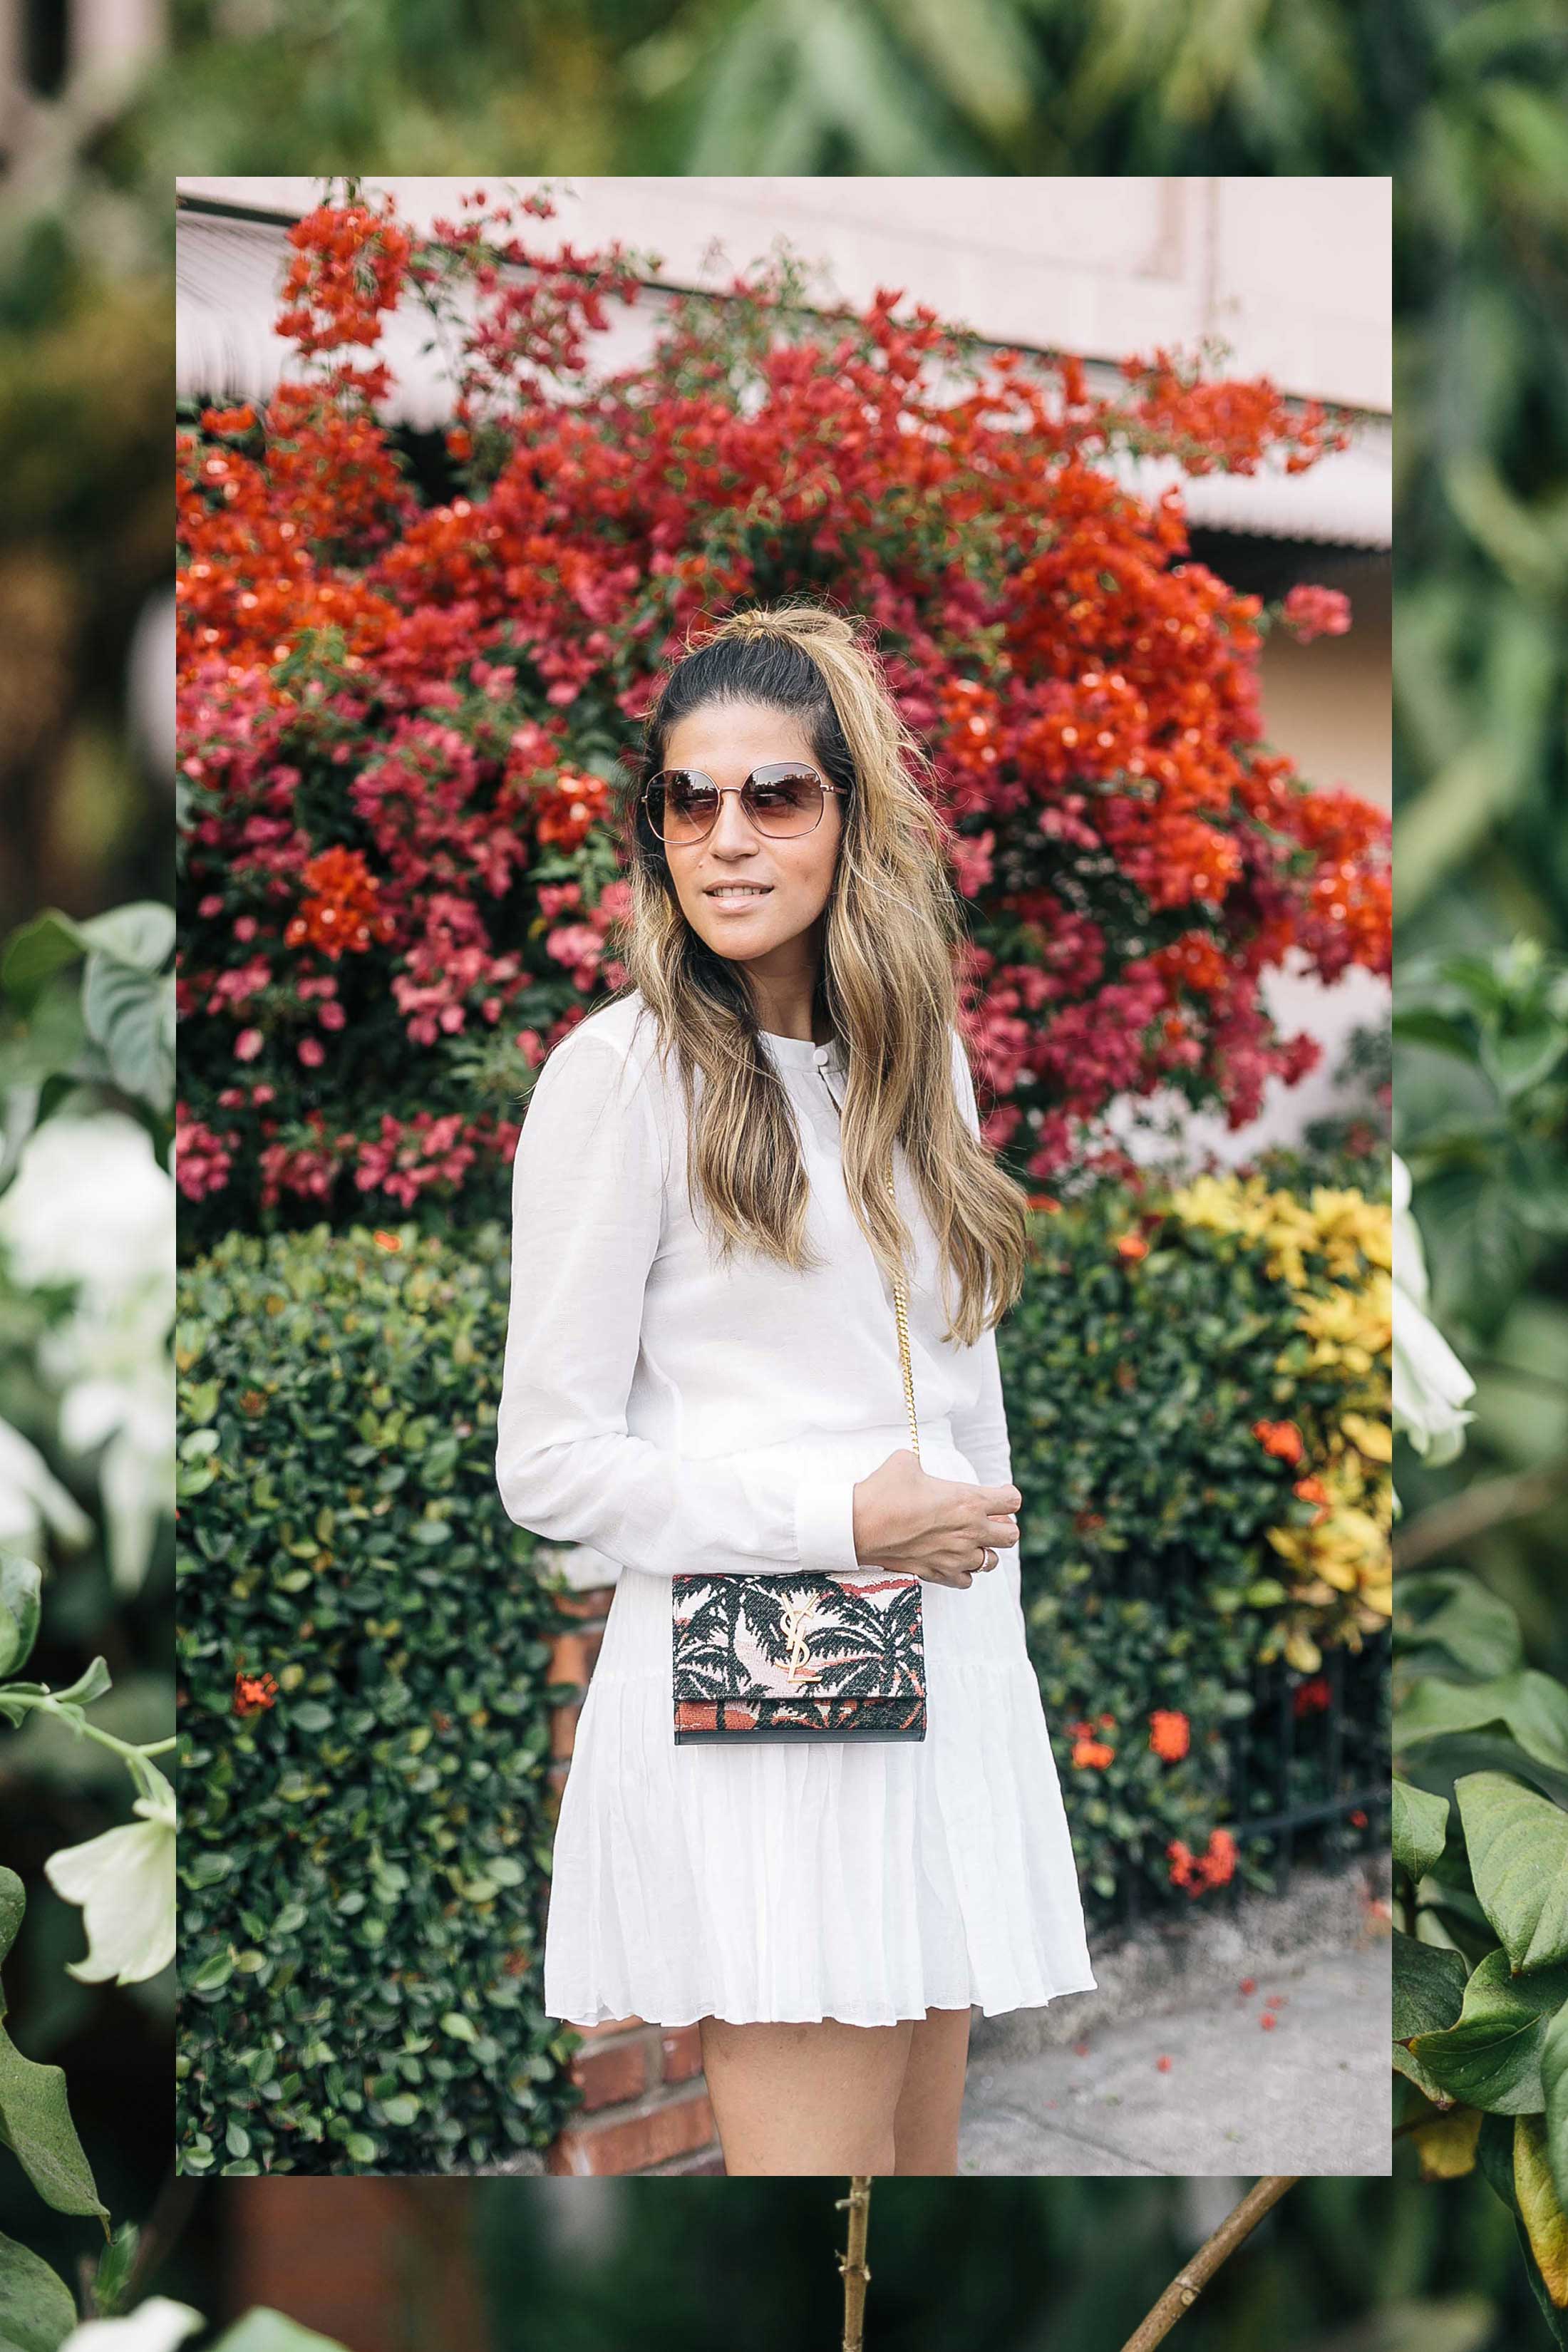 Maristella wears pink sunglasses from Kate Spade, white blouse, white skirt and palm print bag from Saint Laurent